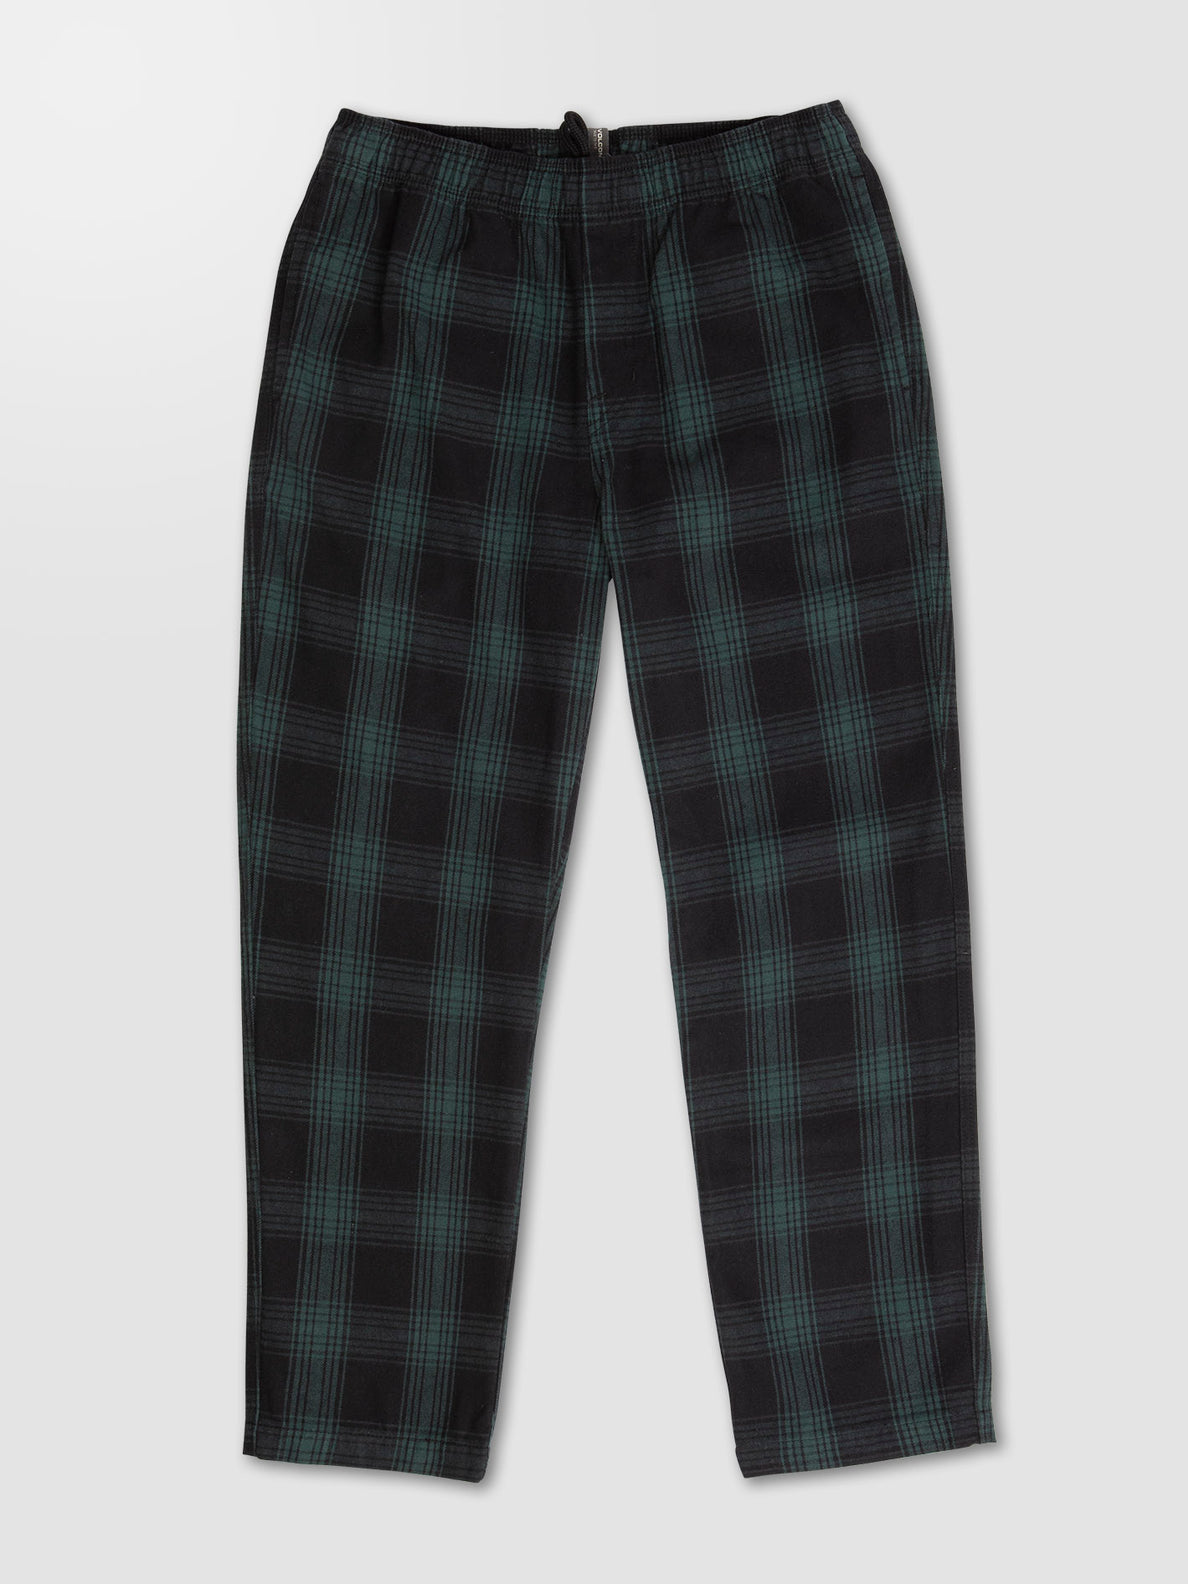 PSYCHSTONE TROUSERS - PLAID